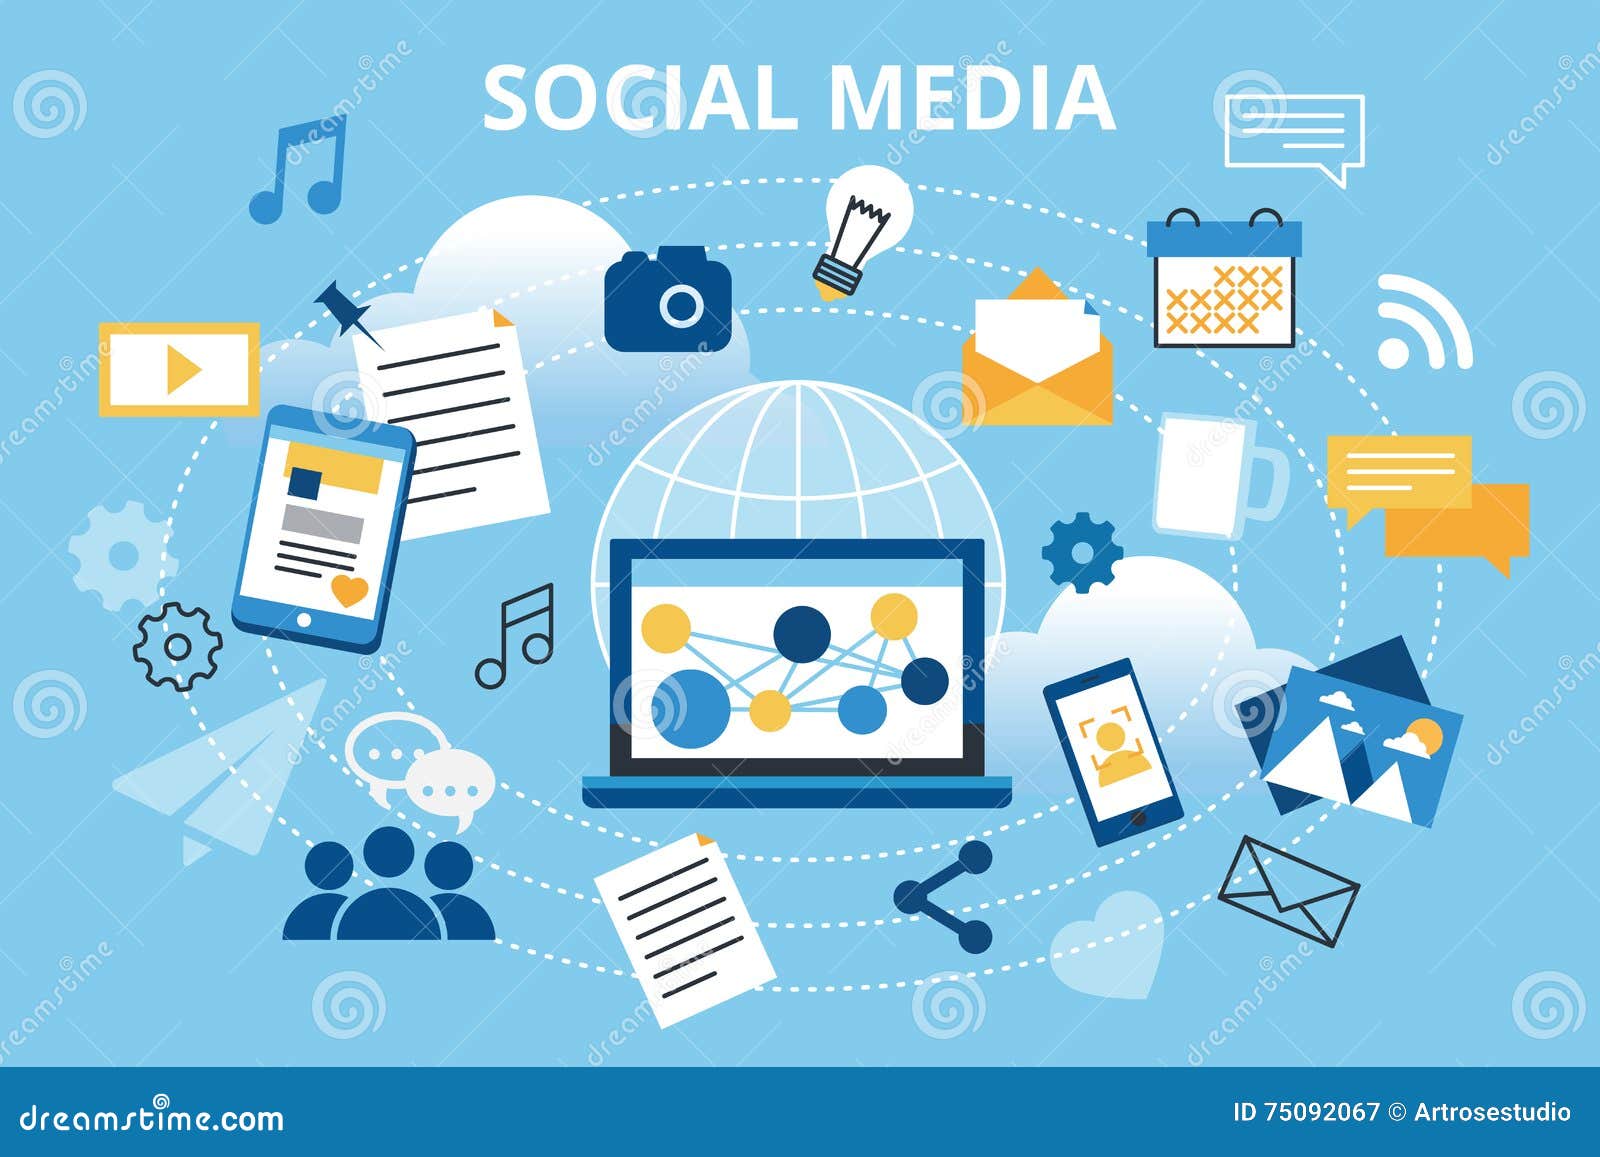 modern flat   , concept of social media, social networking, web communtity and posting news